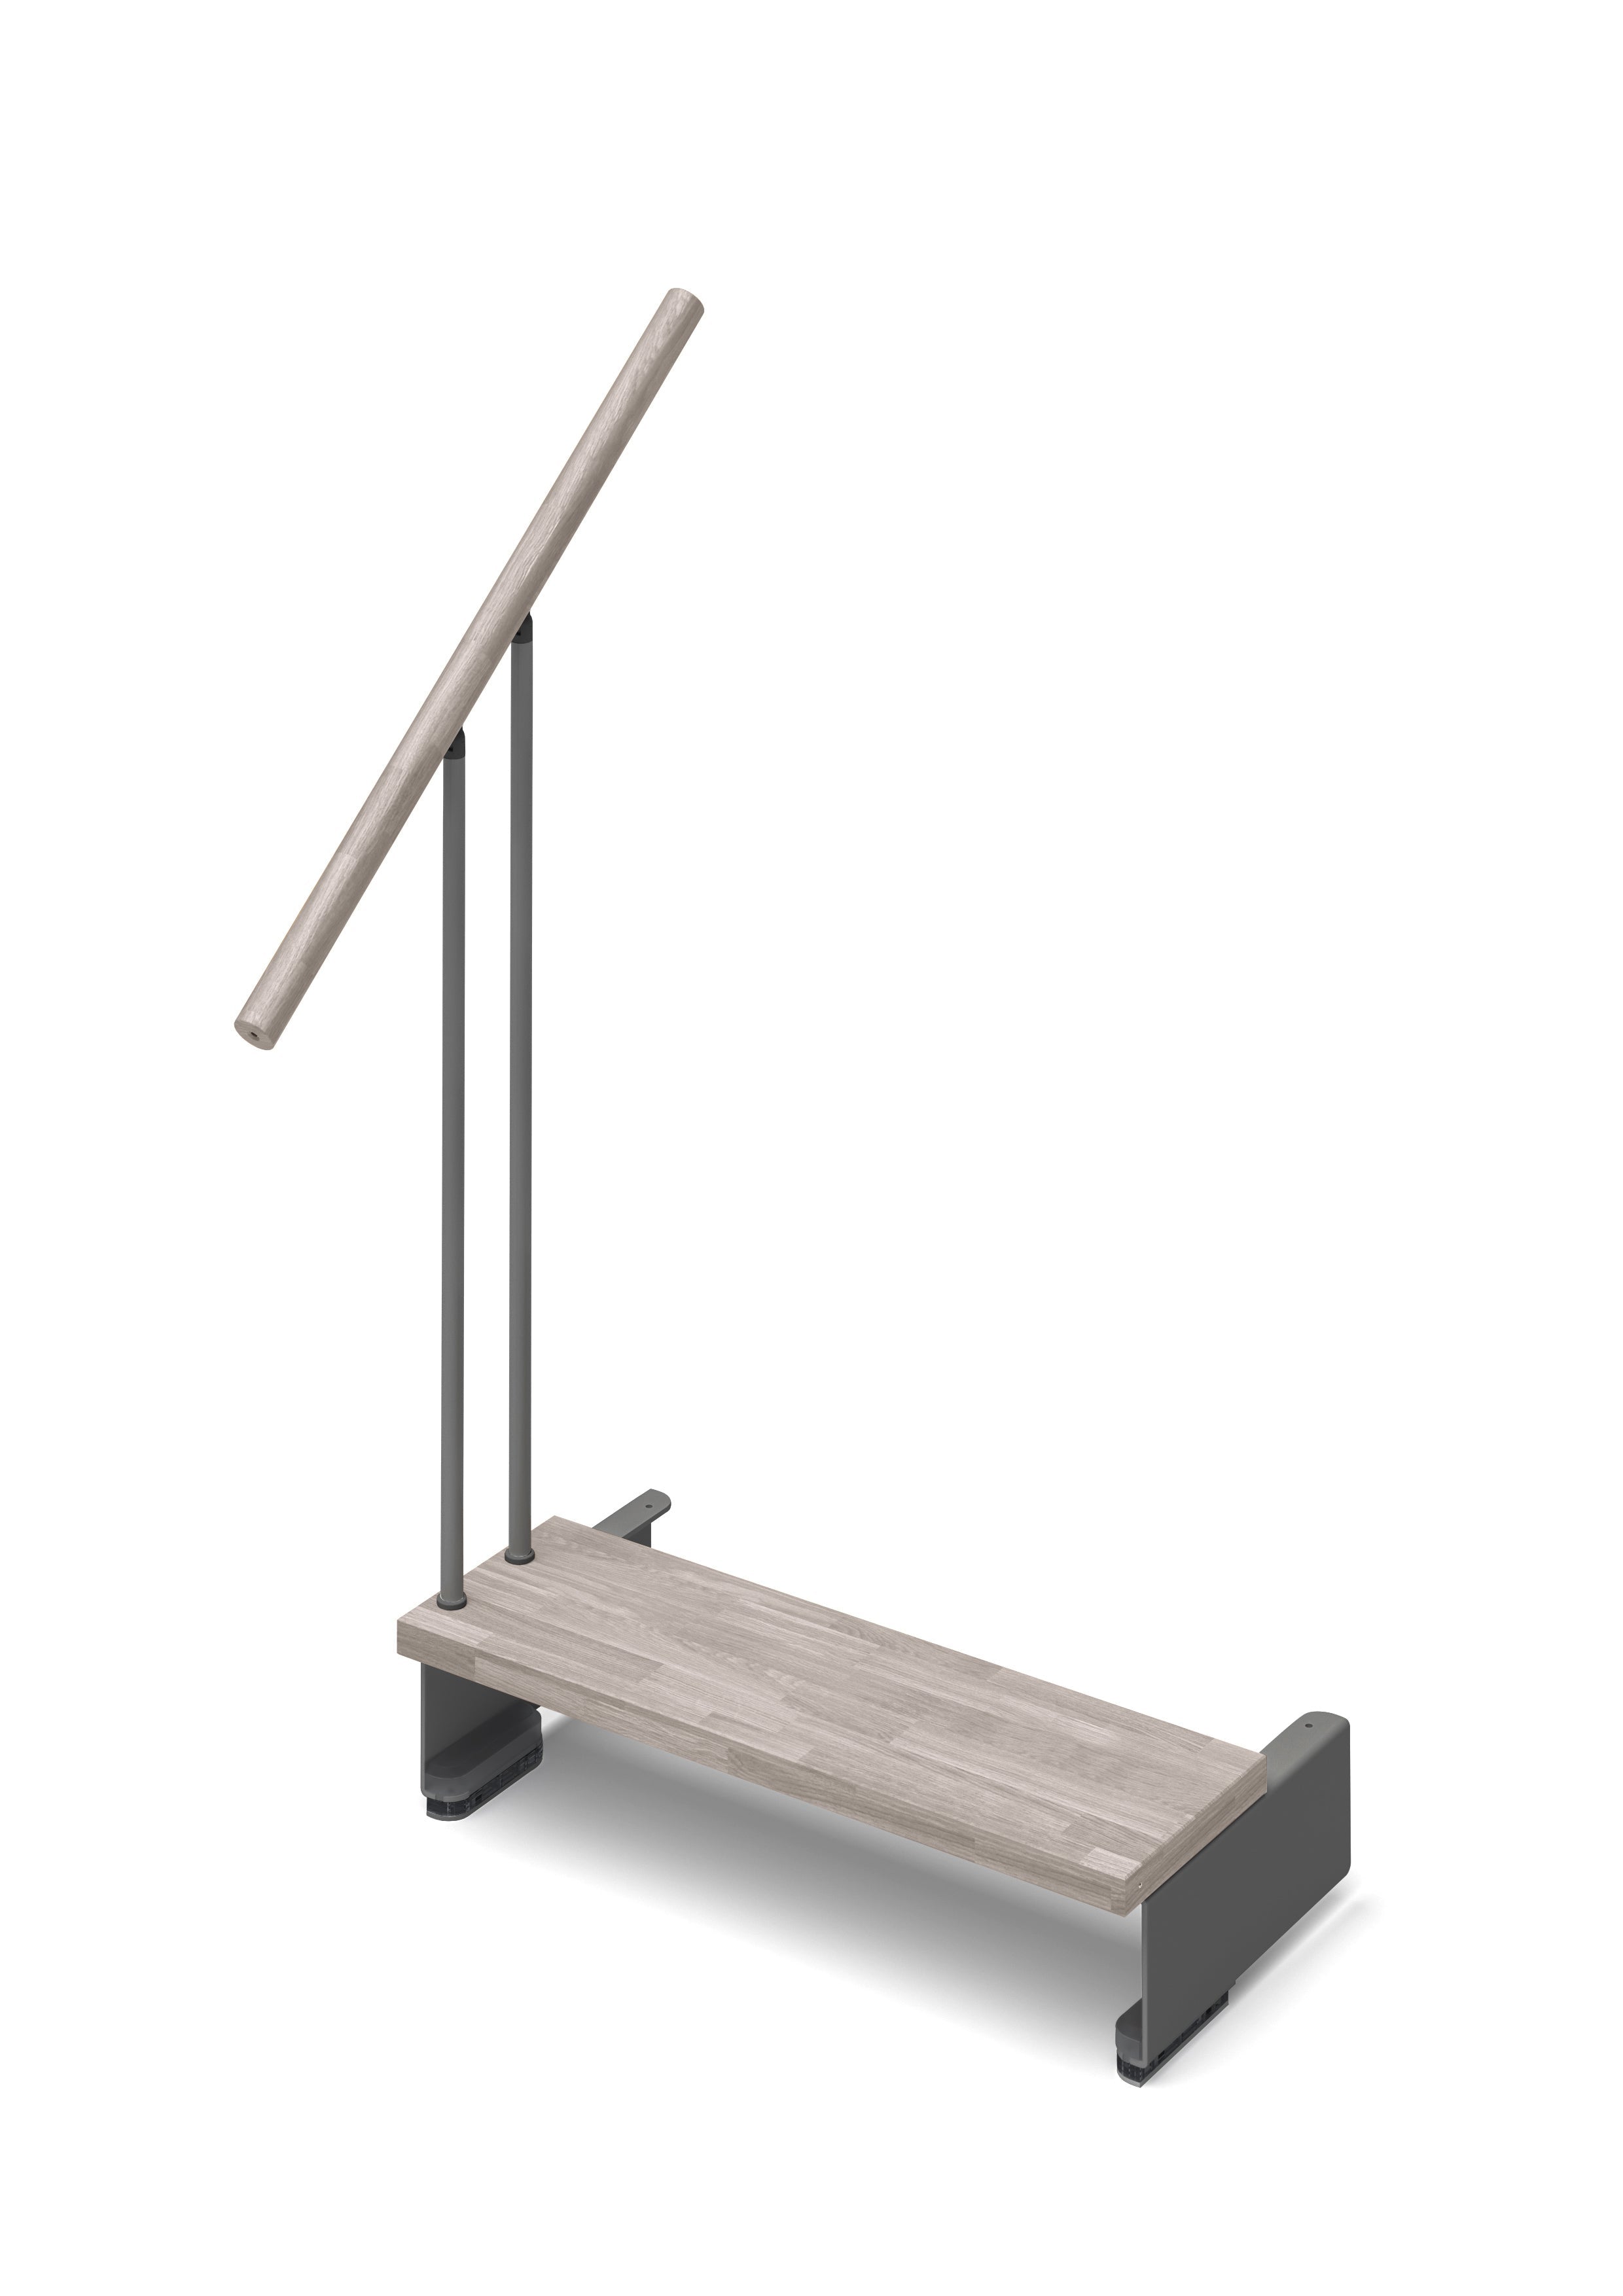 Additional step Adapta 84cm (with structure and railing) - Tortora 87